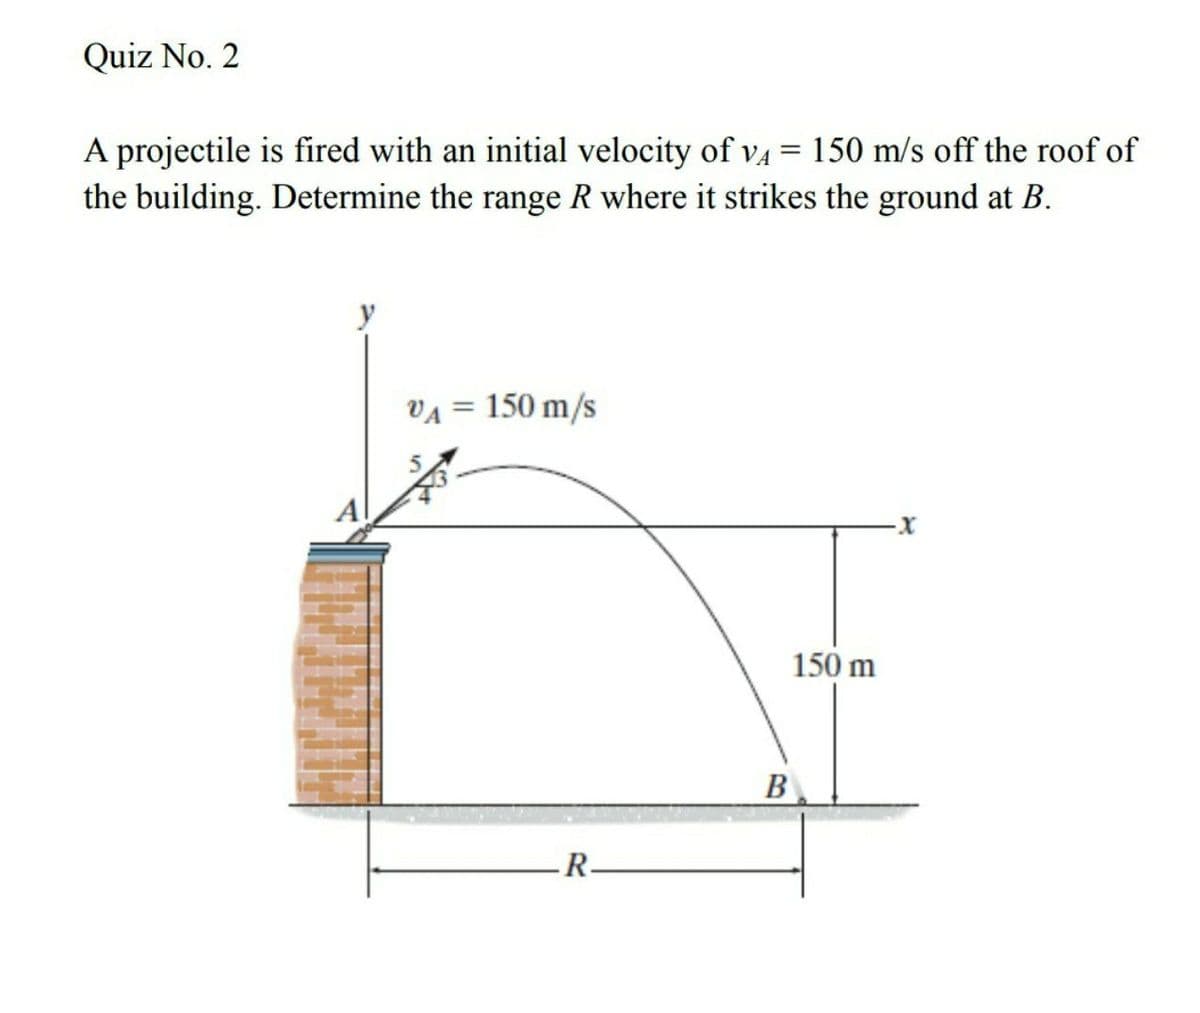 Quiz No. 2
A projectile is fired with an initial velocity of v4 = 150 m/s off the roof of
the building. Determine the range R where it strikes the ground at B.
VA = 150 m/s
%3D
150 m
B
R-
